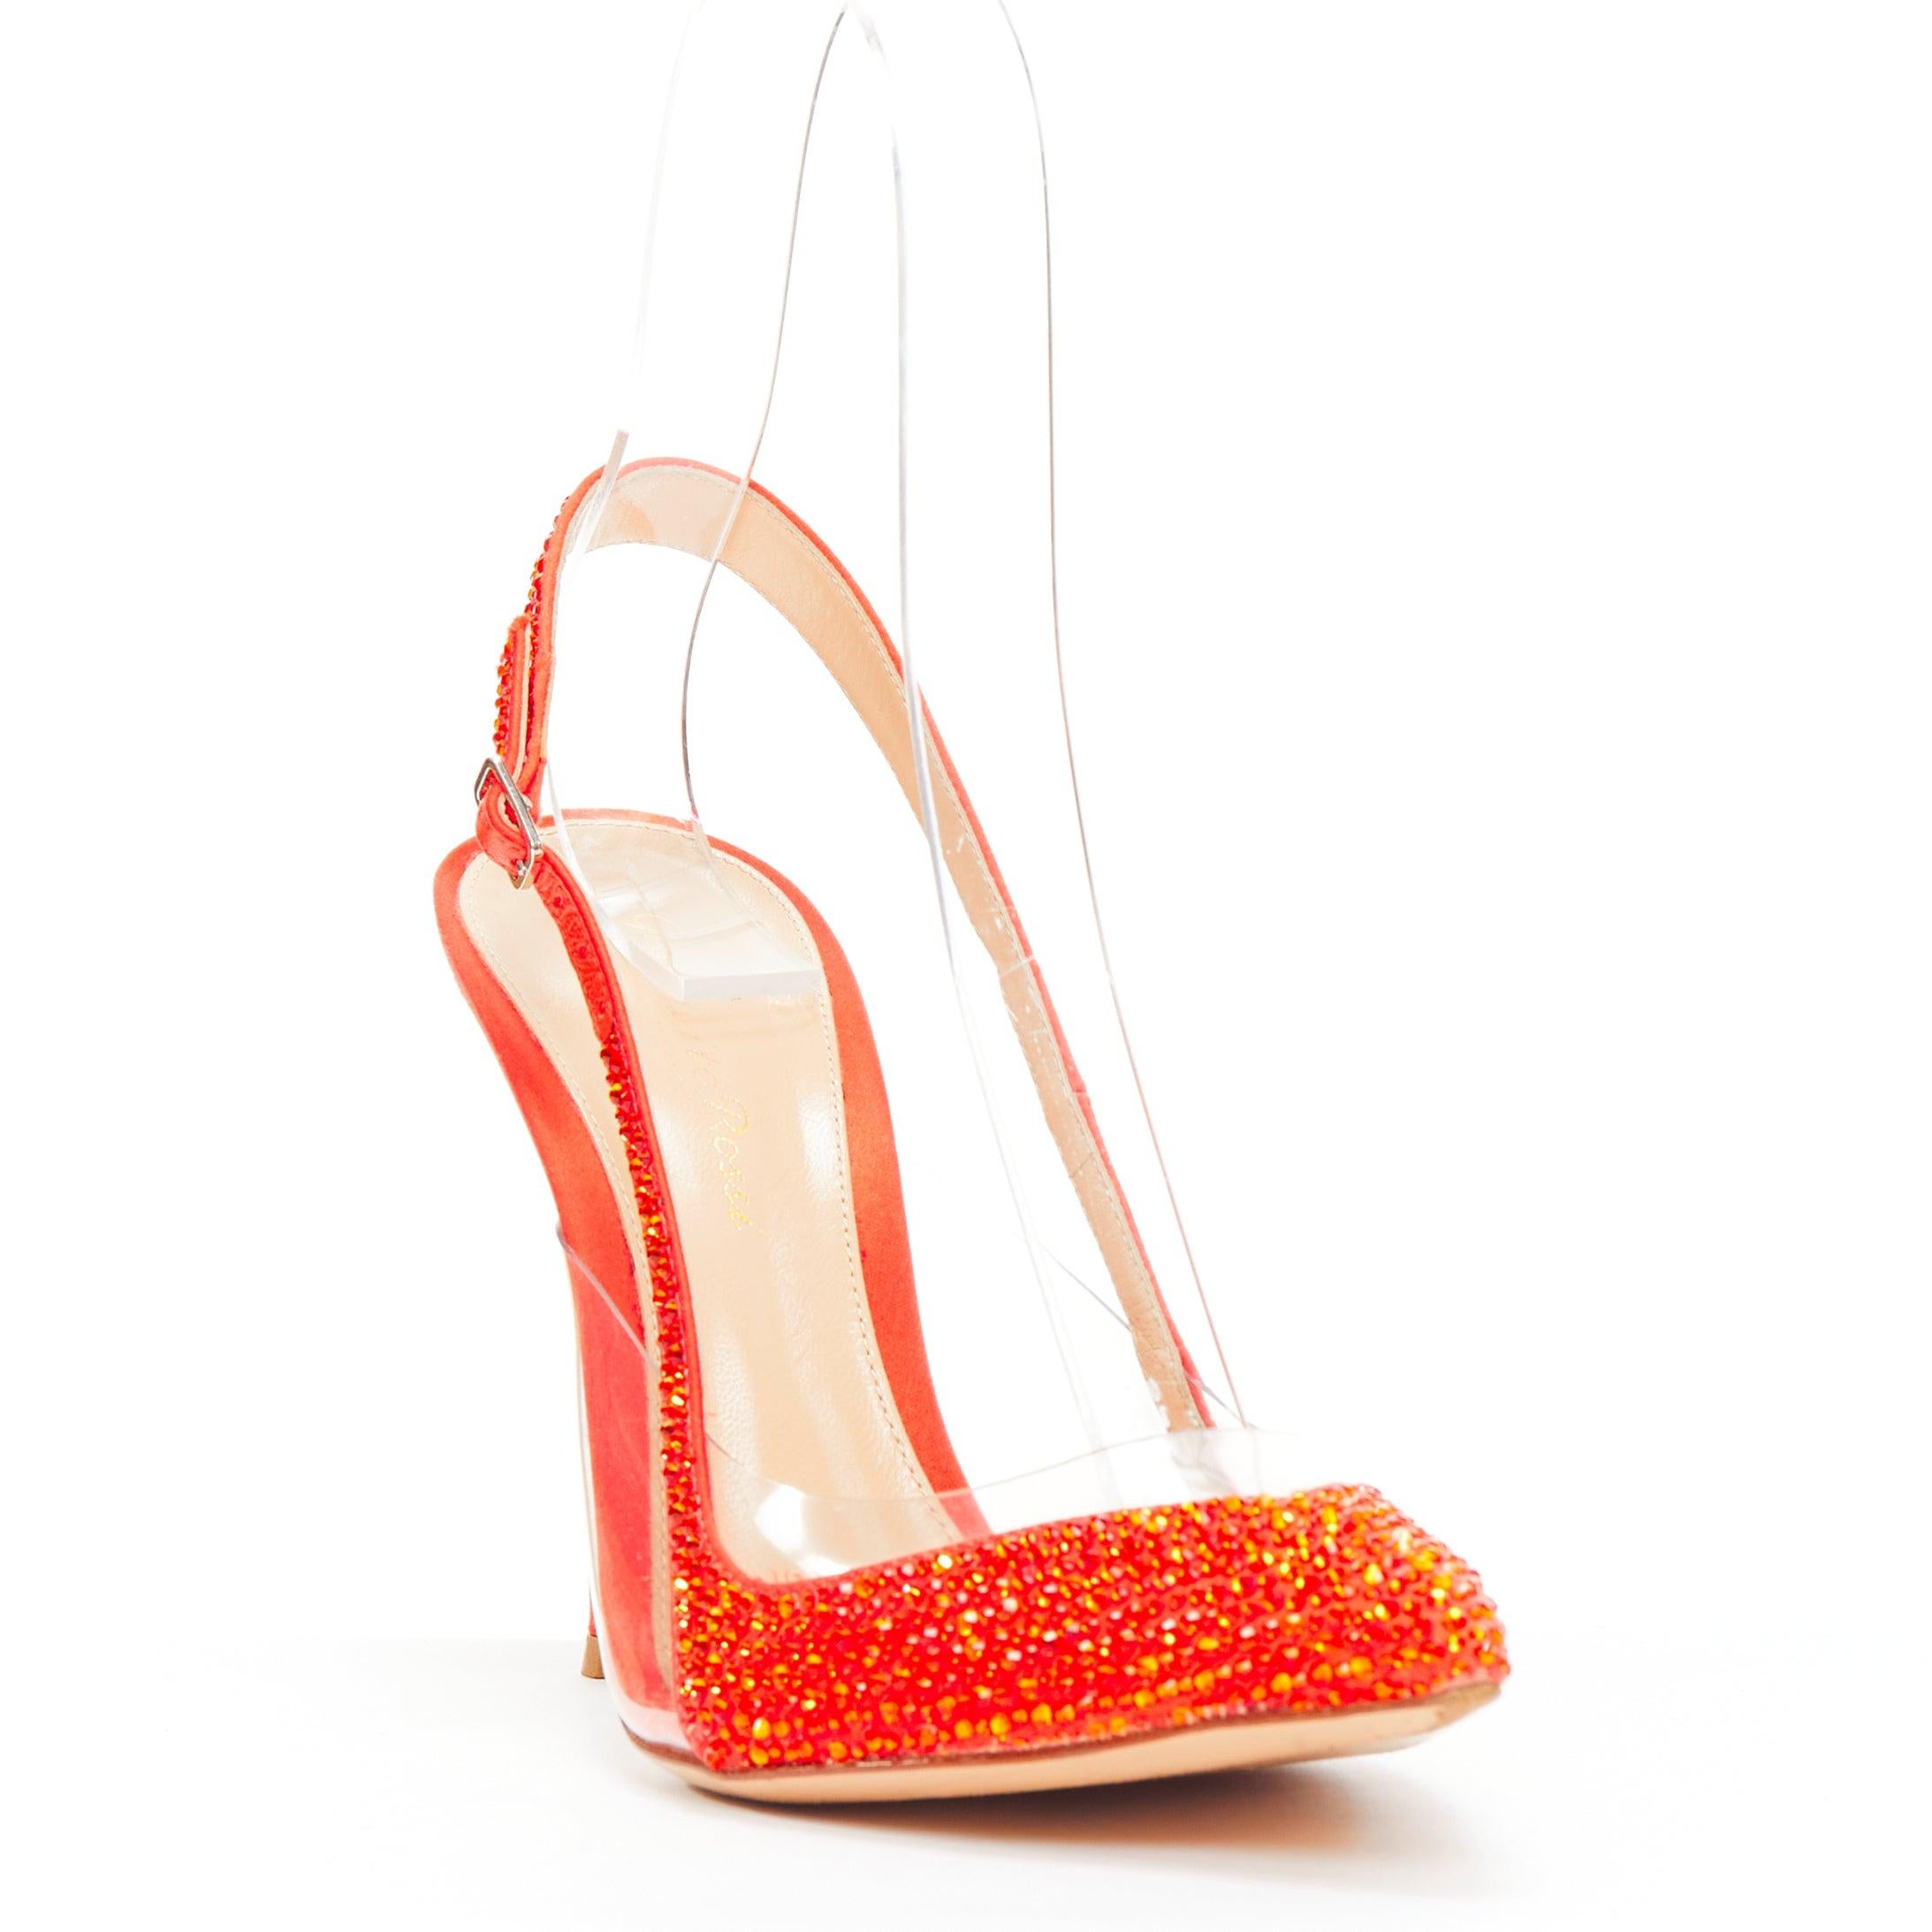 GIANVITO ROSSI red strass crystal encrusted clear PVC slingback pump EU37.5
Reference: NKLL/A00102
Brand: Gianvito Rossi
Material: Satin, PVC
Color: Red
Pattern: Solid
Closure: Slingback
Lining: Brown Leather
Extra Details: MIxed orange and red